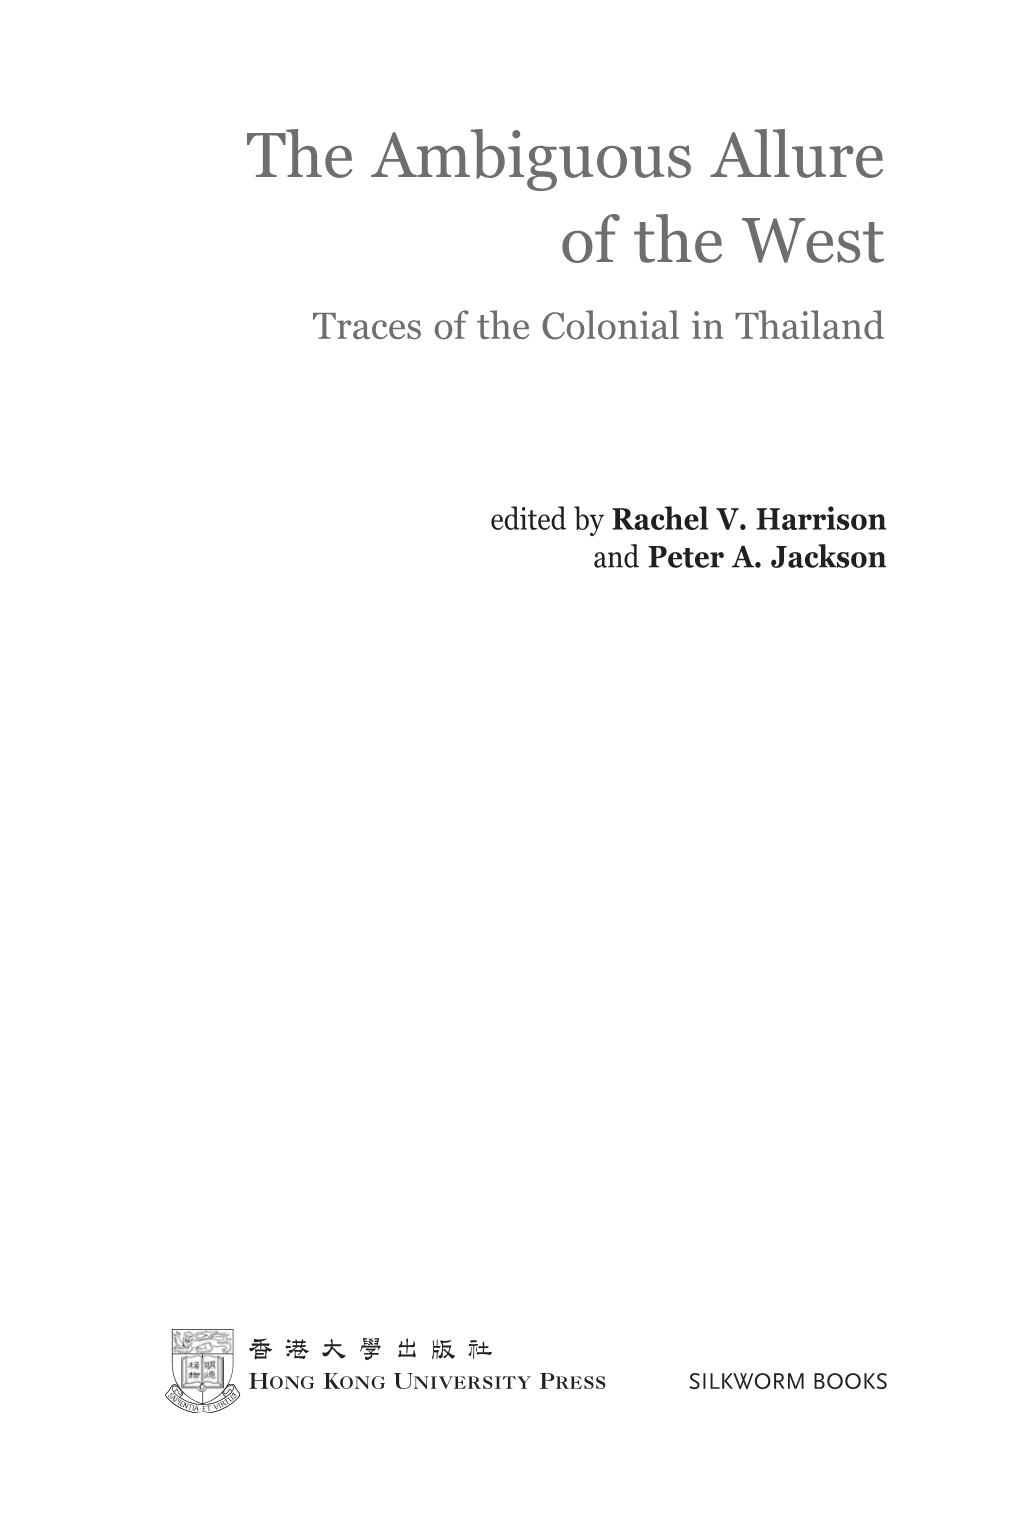 The Ambiguous Allure of the West Traces of the Colonial in Thailand